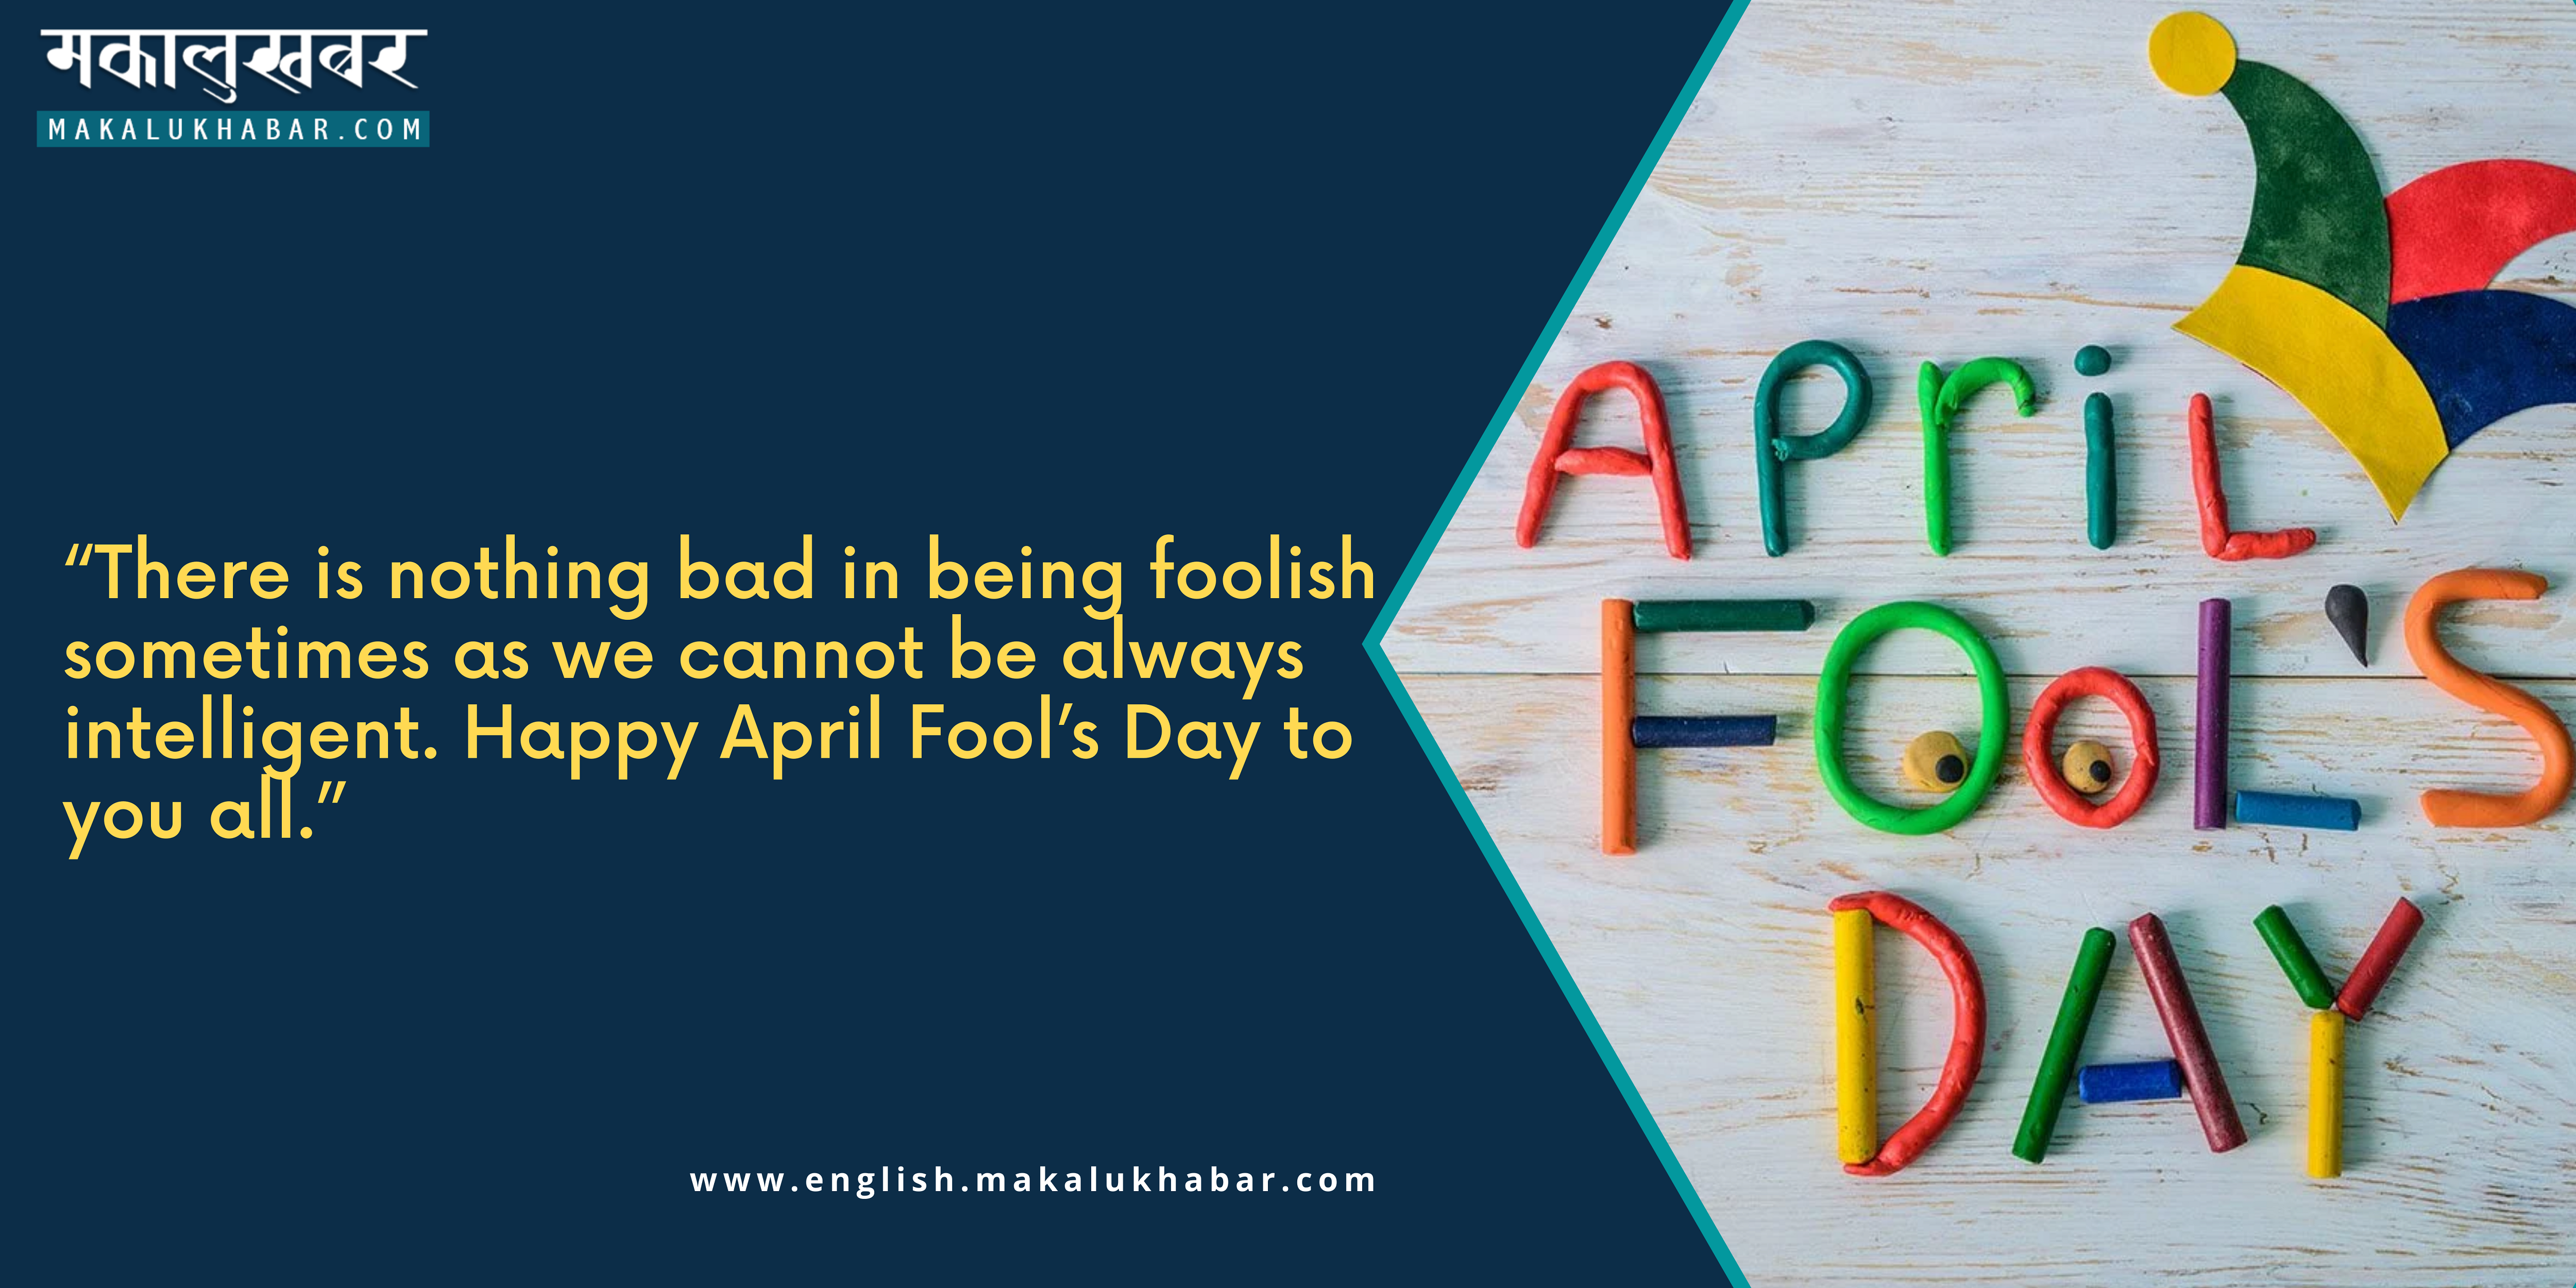 April Fools’ Day 2022: History, Significance & why is April 1st observed as April Fool’s Day?